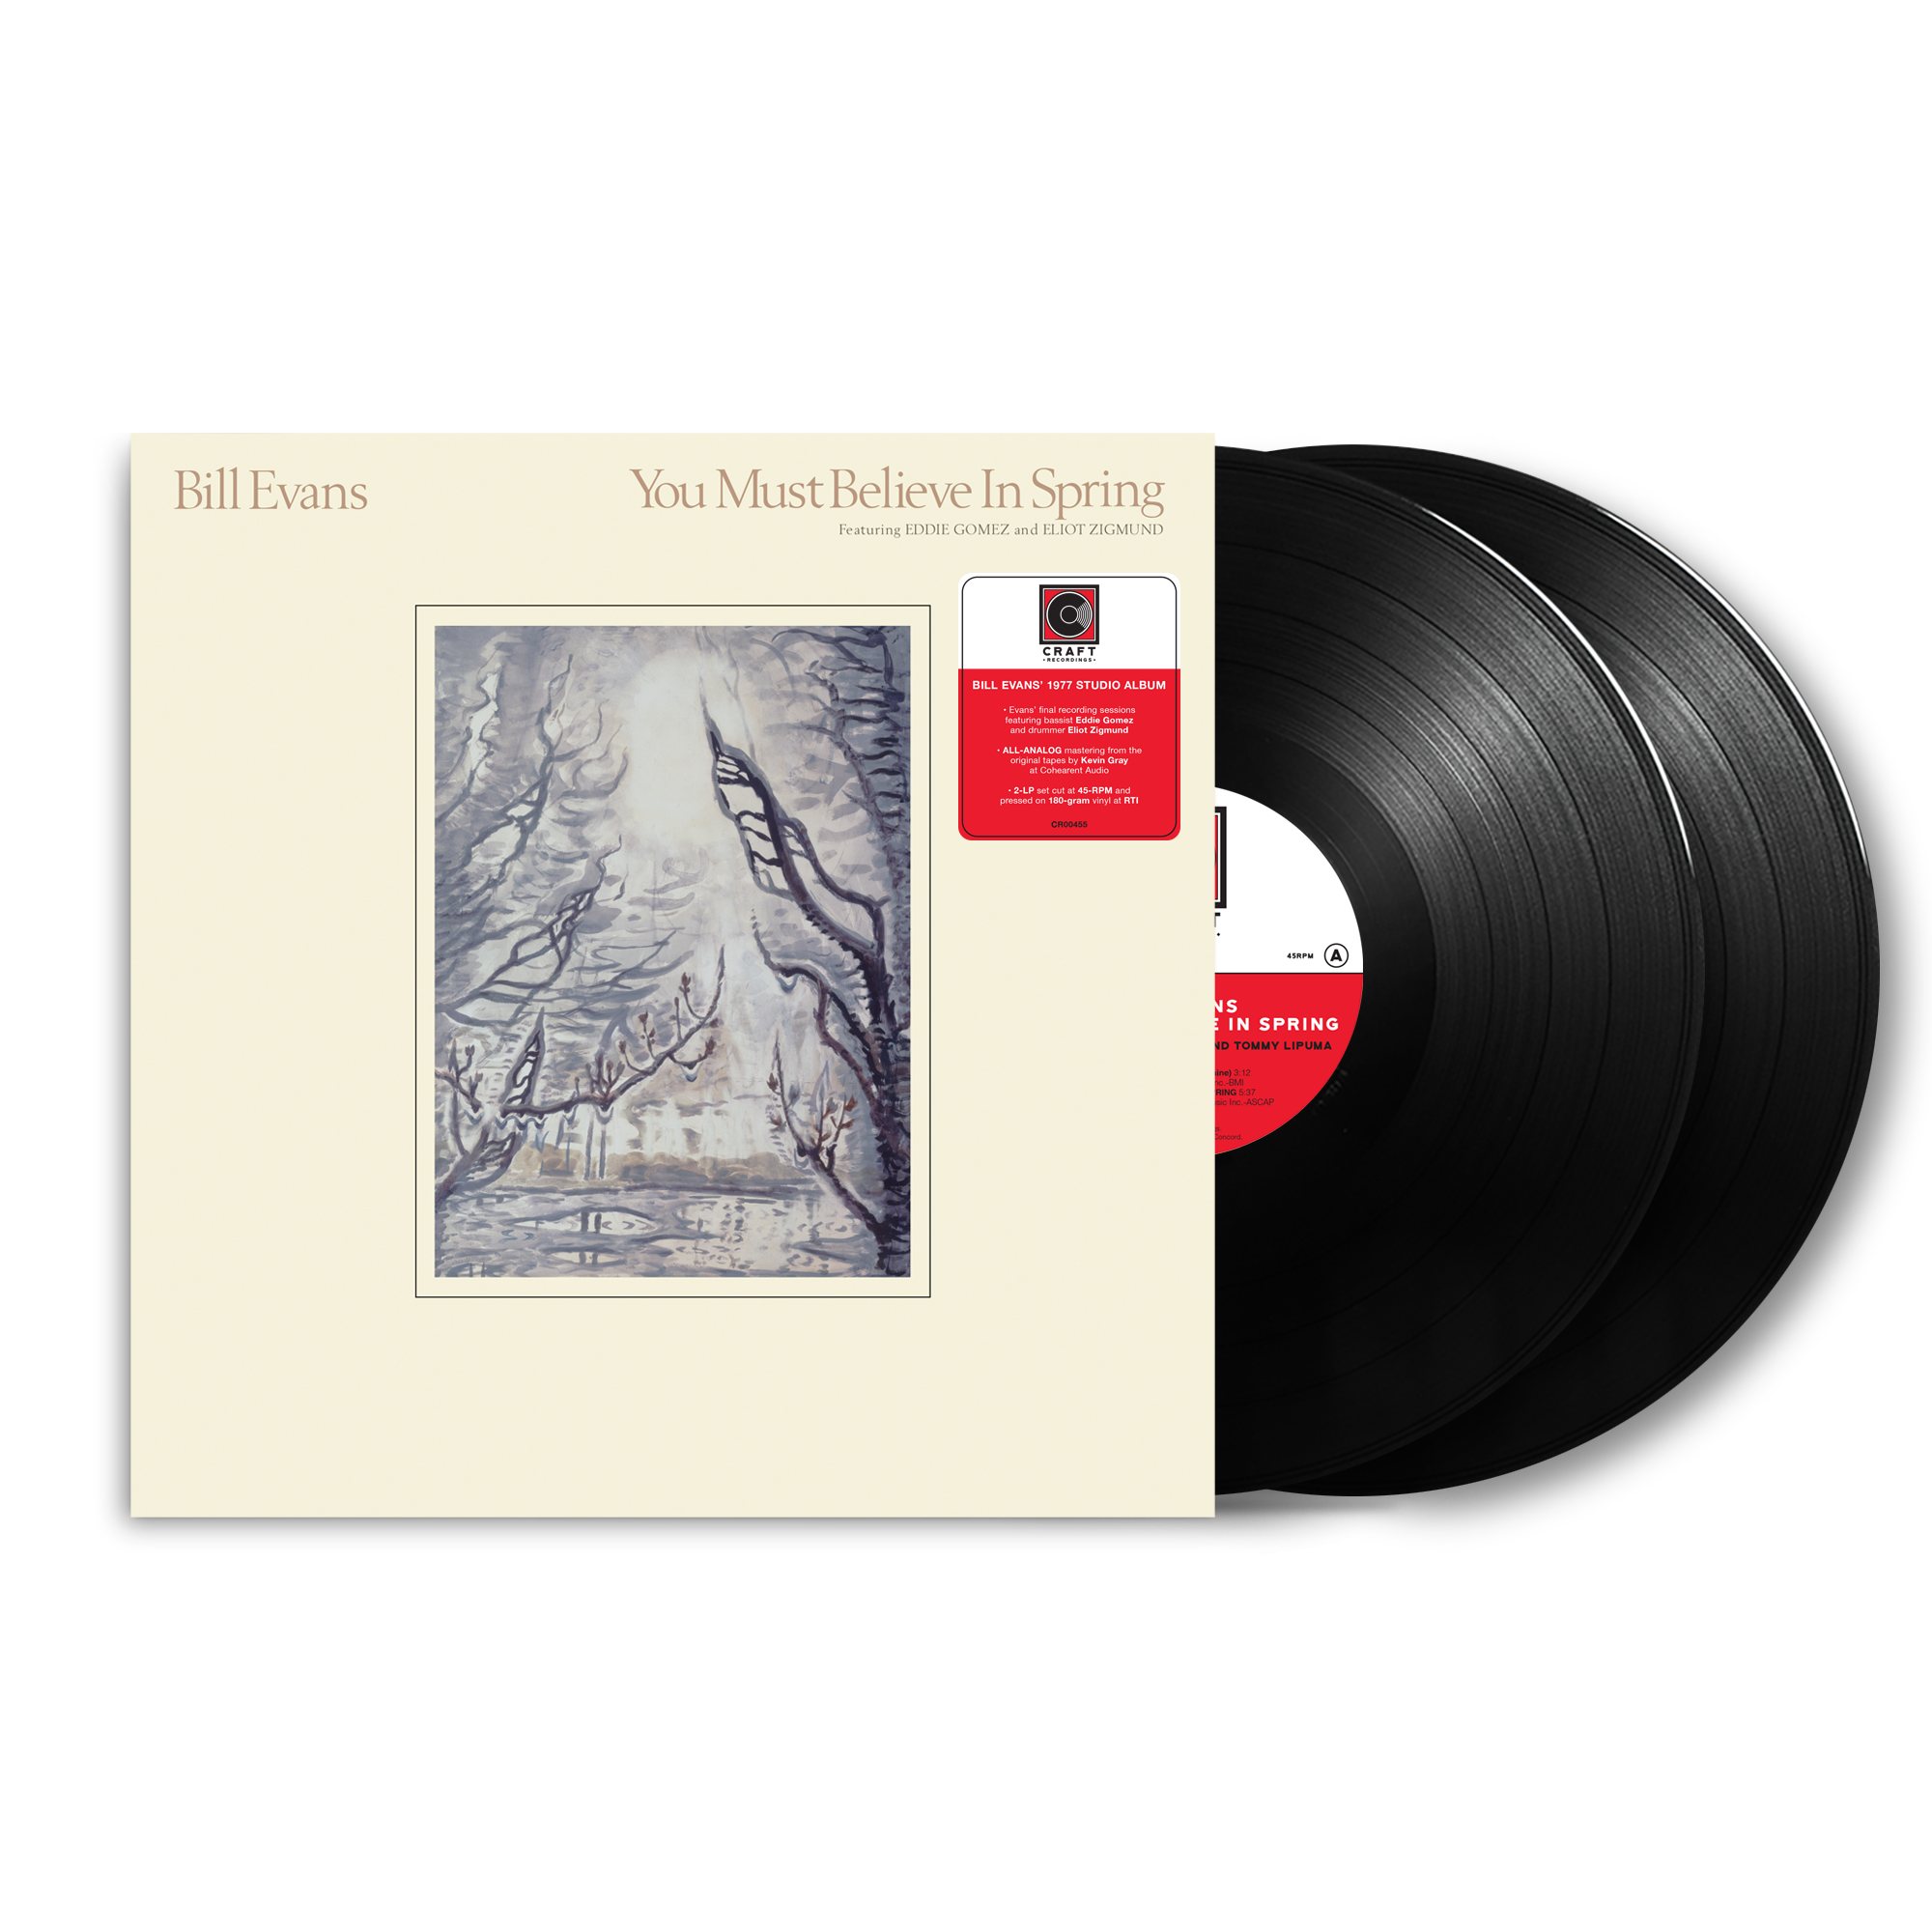 News Archive - Bill Evans | Official Store